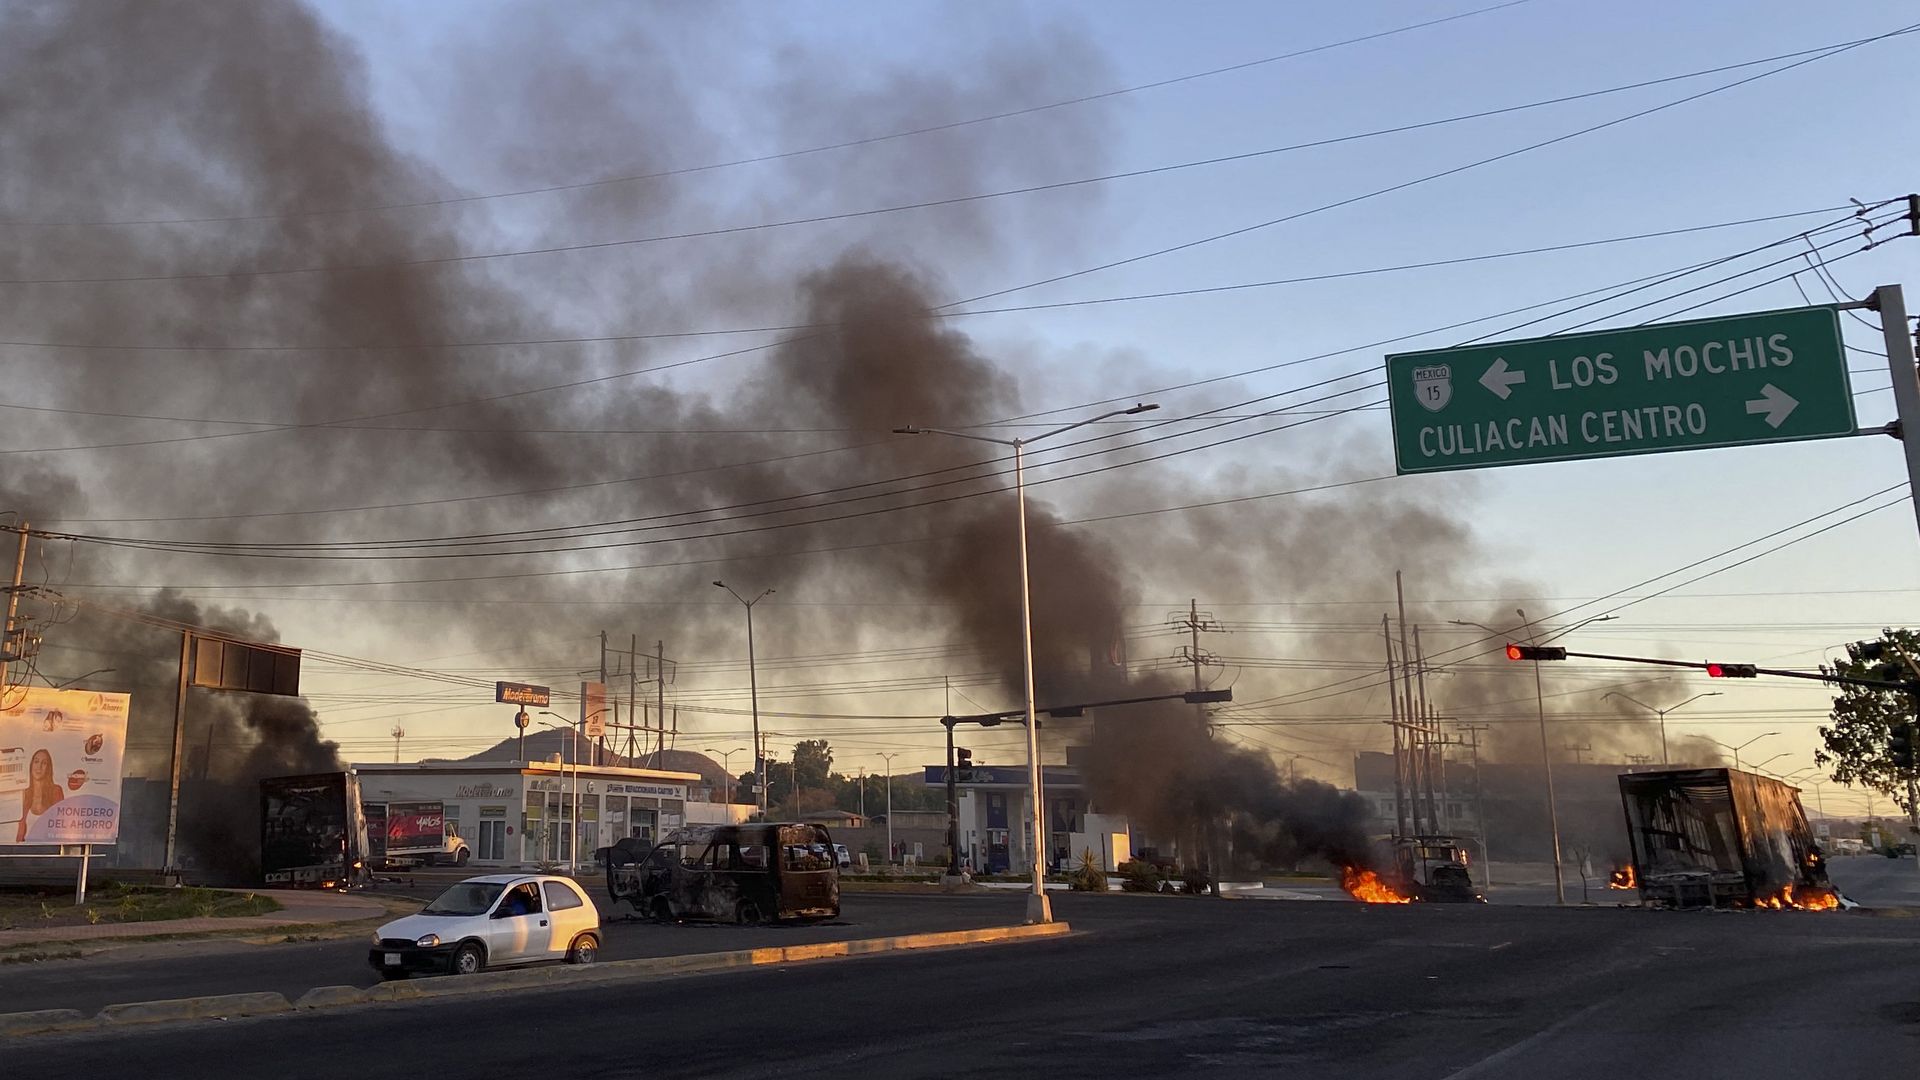 Burning vehicles are seen crossed in the street during an operation to arrest the son of Joaquin "El Chapo" Guzman, Ovidio Guzman, in Culiacan, Sinaloa state, Mexico, on January 5.